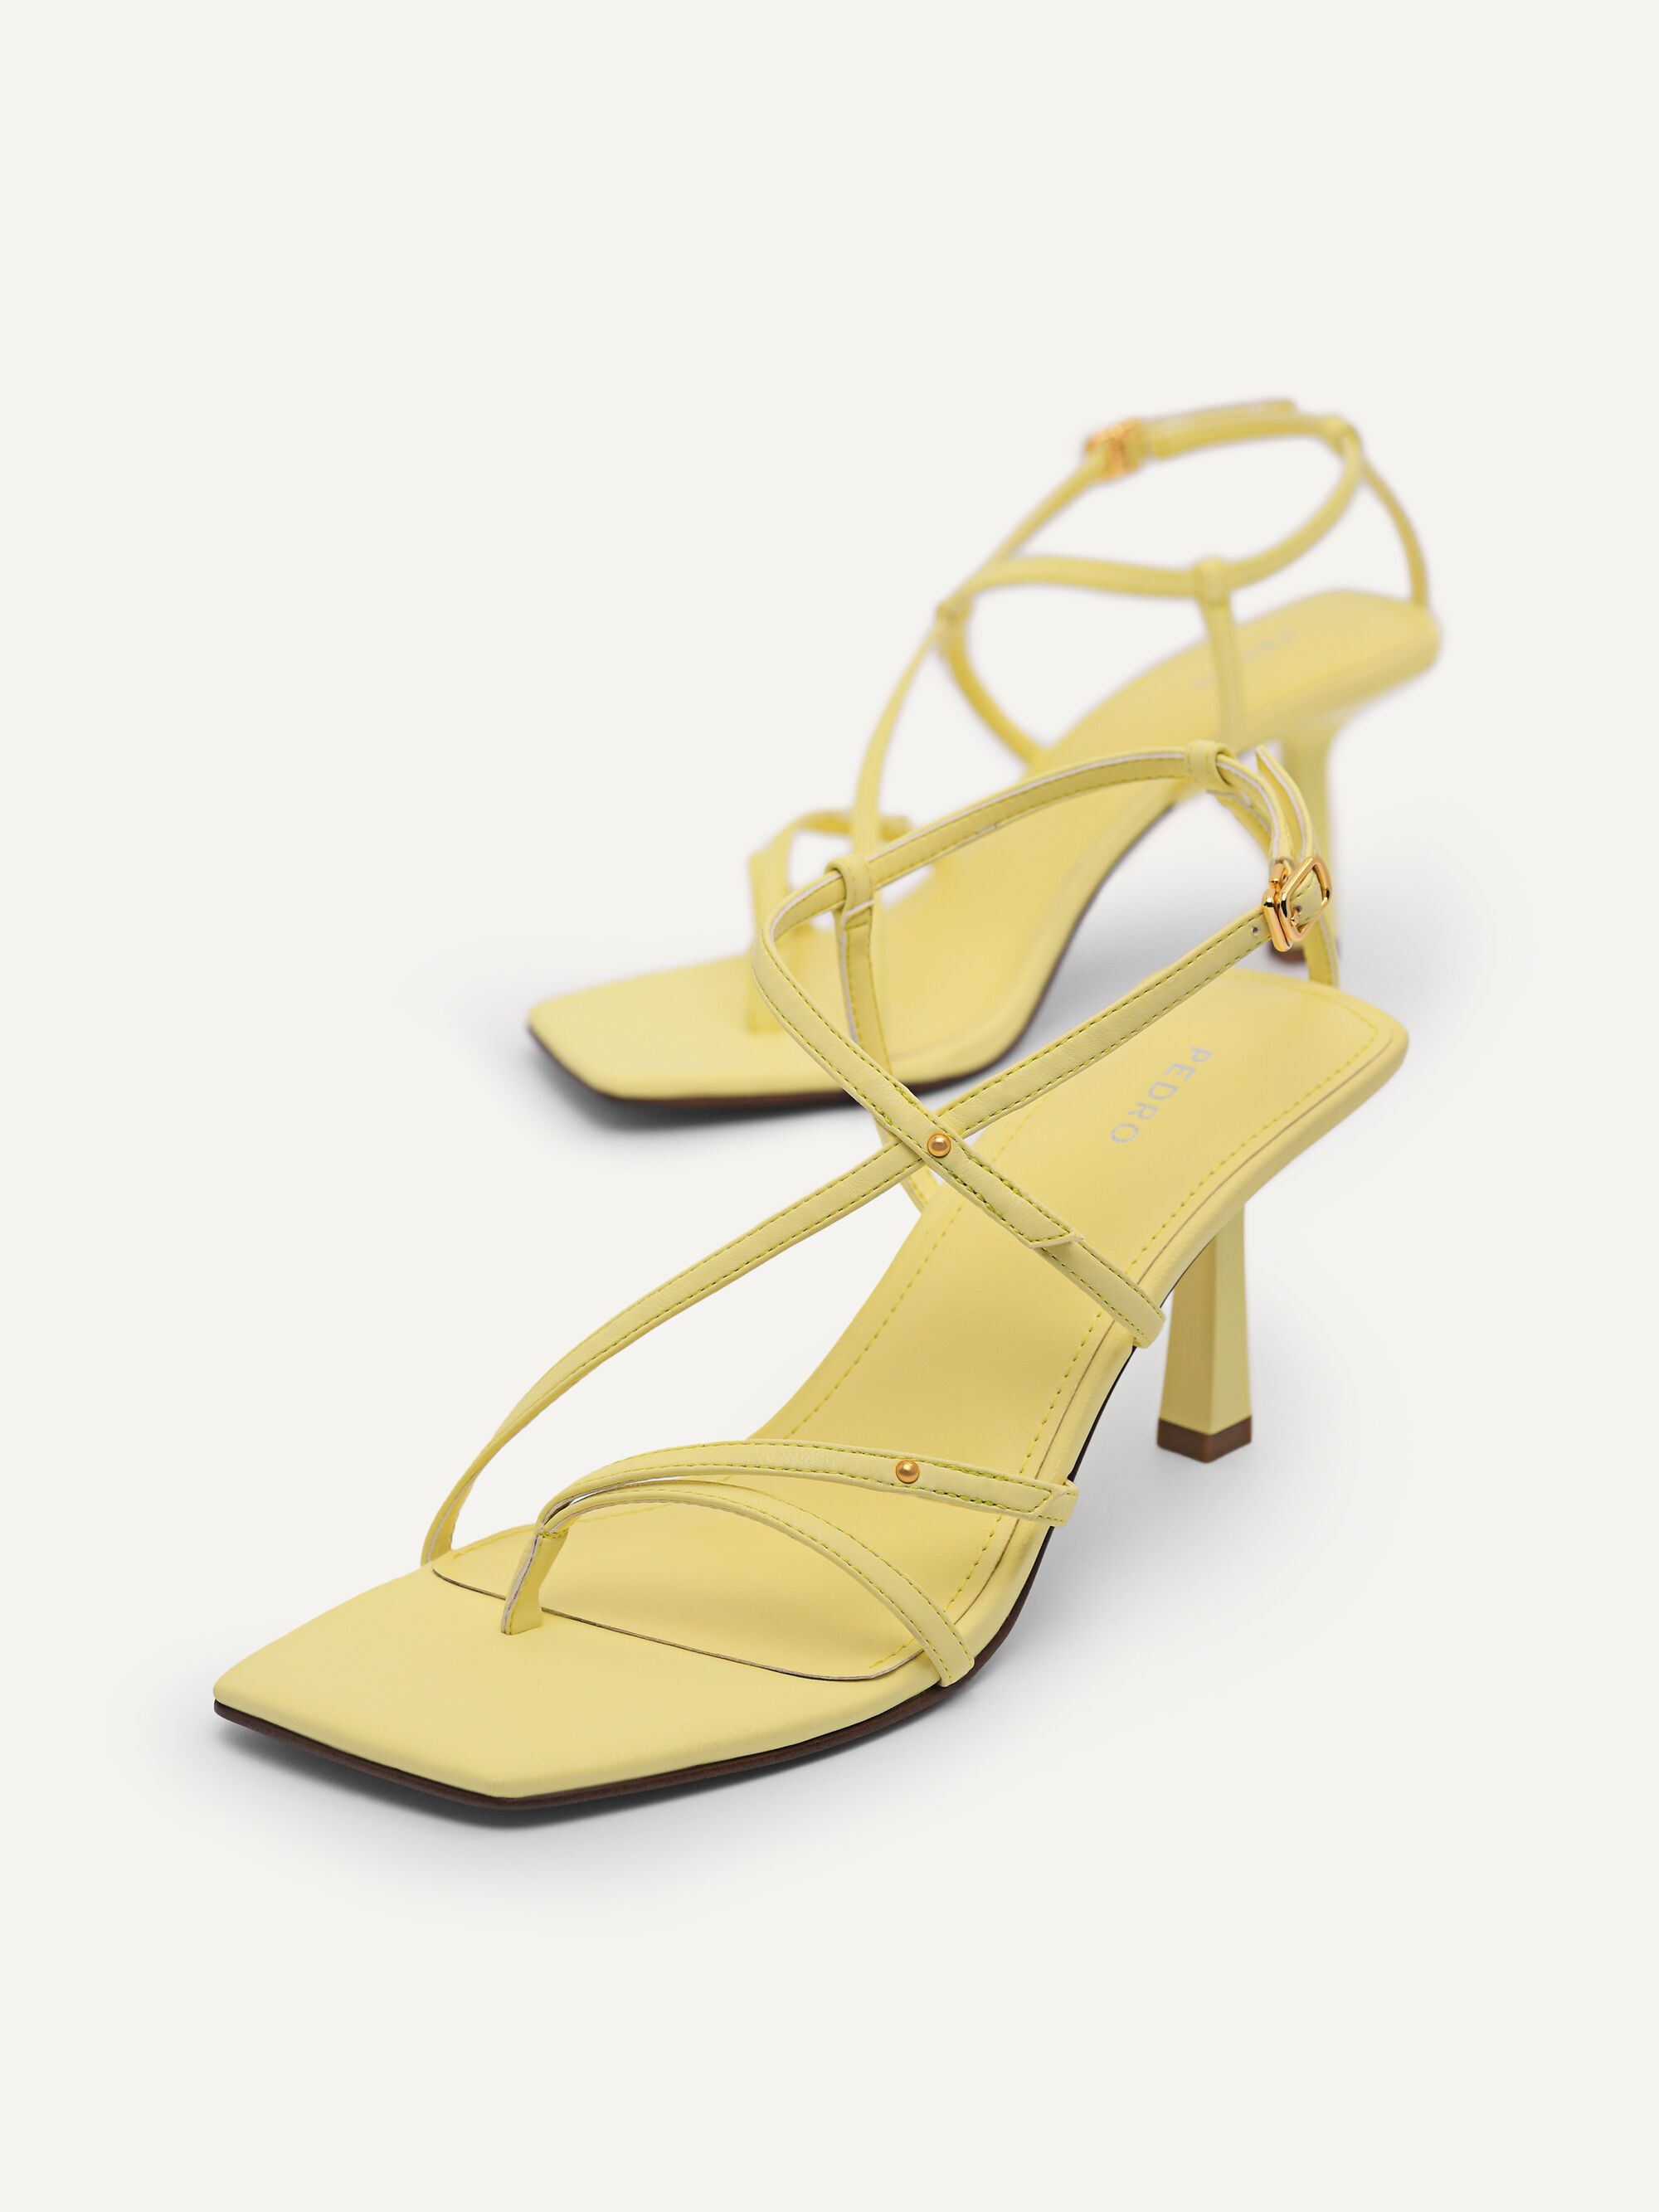 yellow strappy heeled sandals